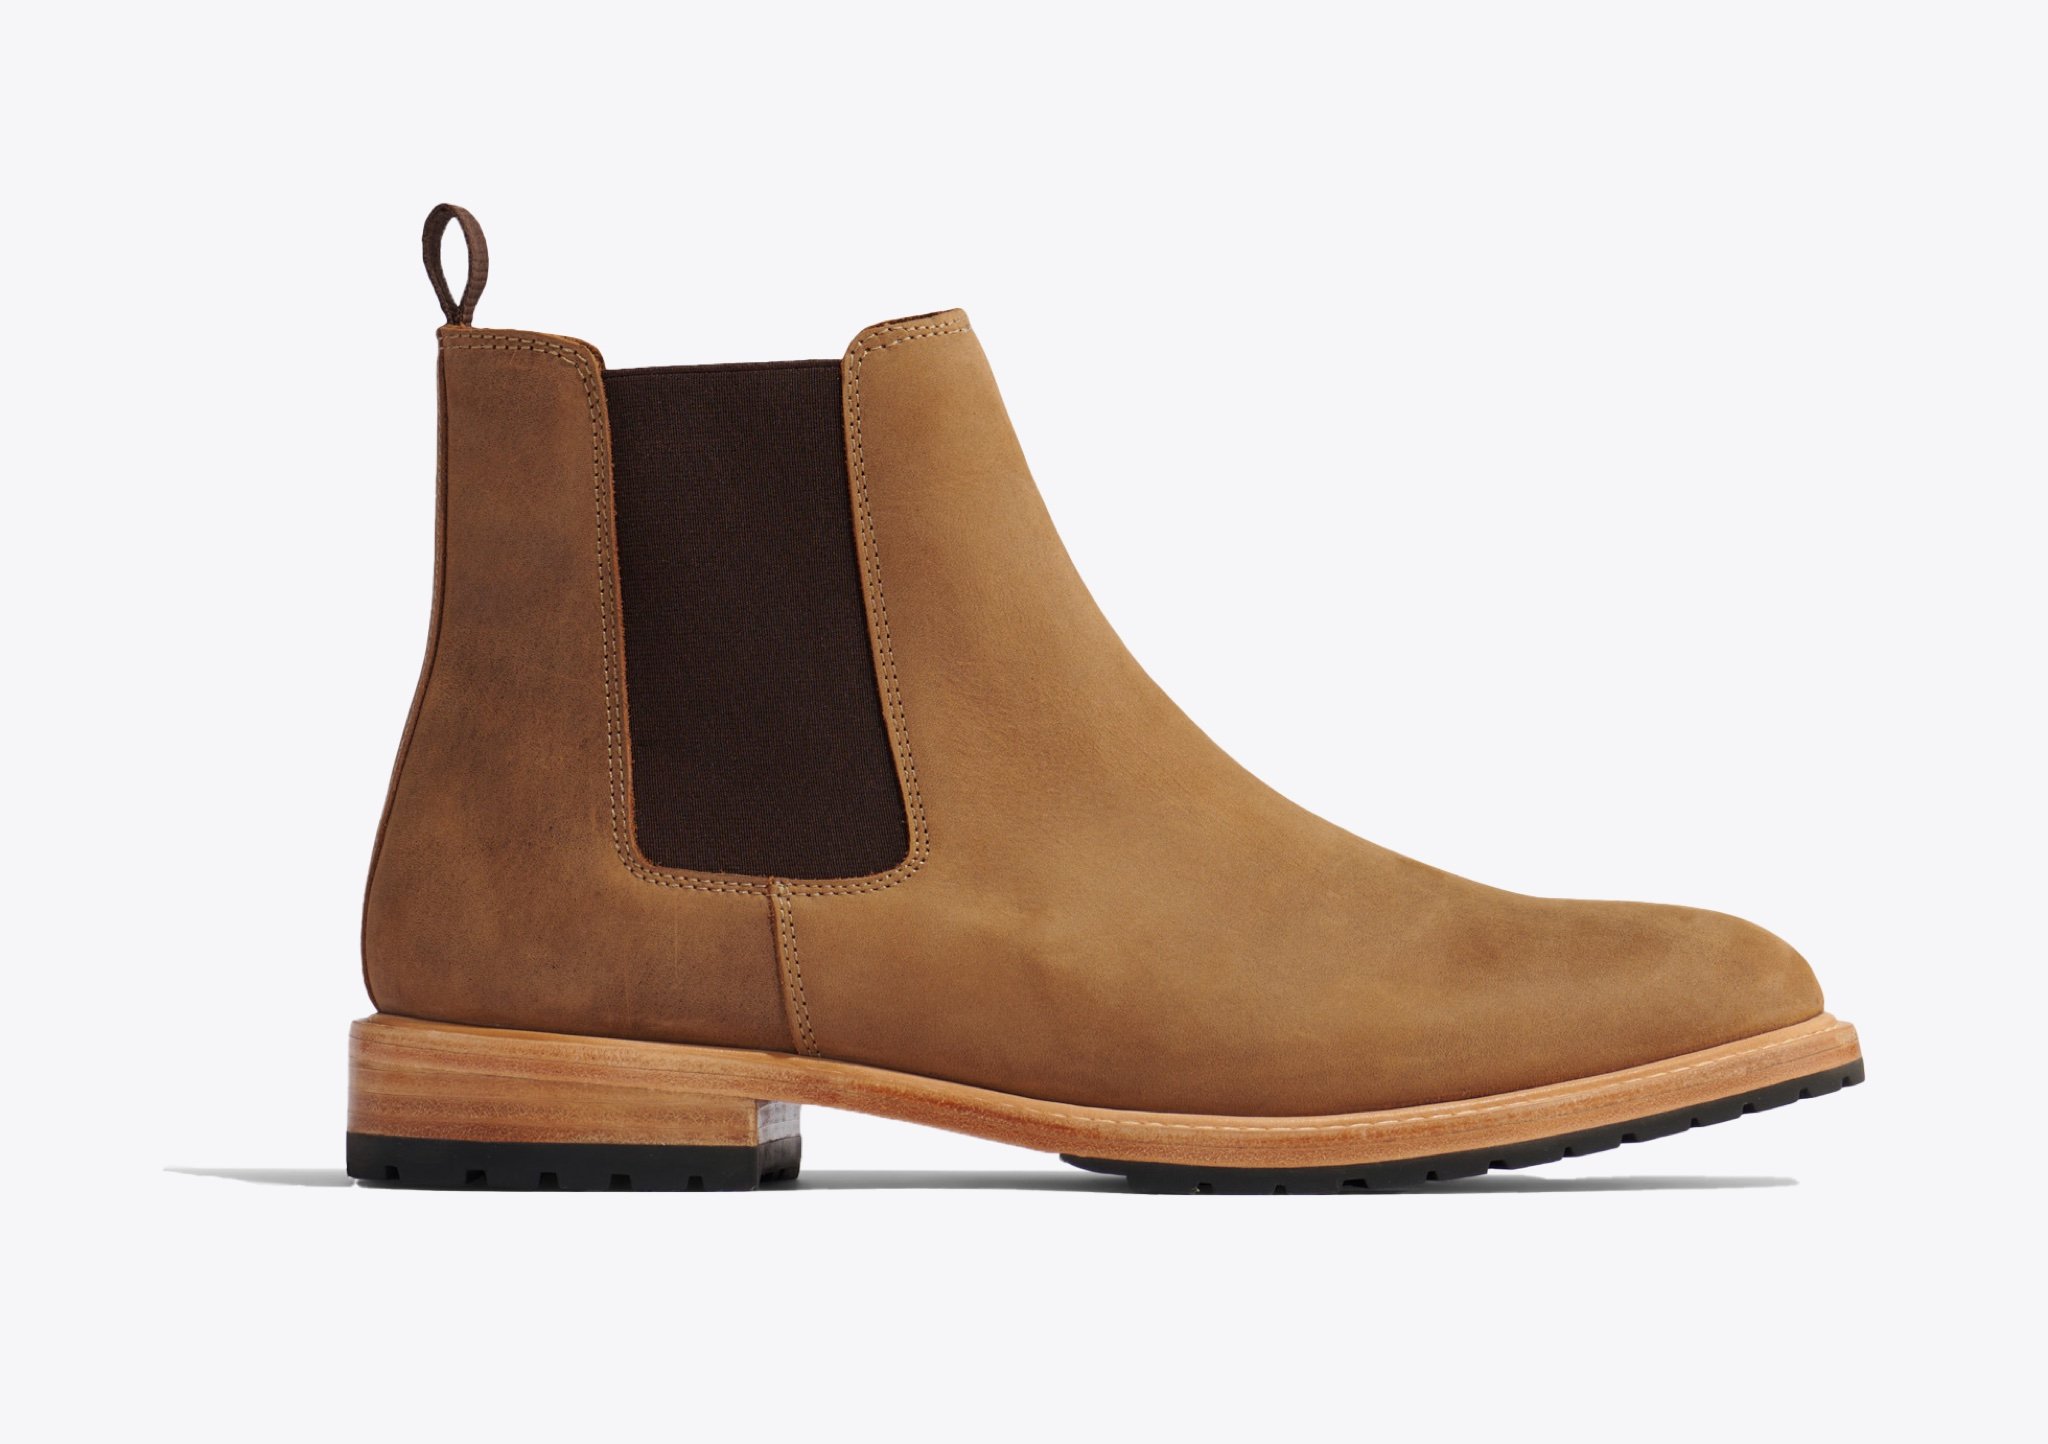 Nisolo Marco Everyday Chelsea Boot Tobacco - Every Nisolo product is built on the foundation of comfort, function, and design. 